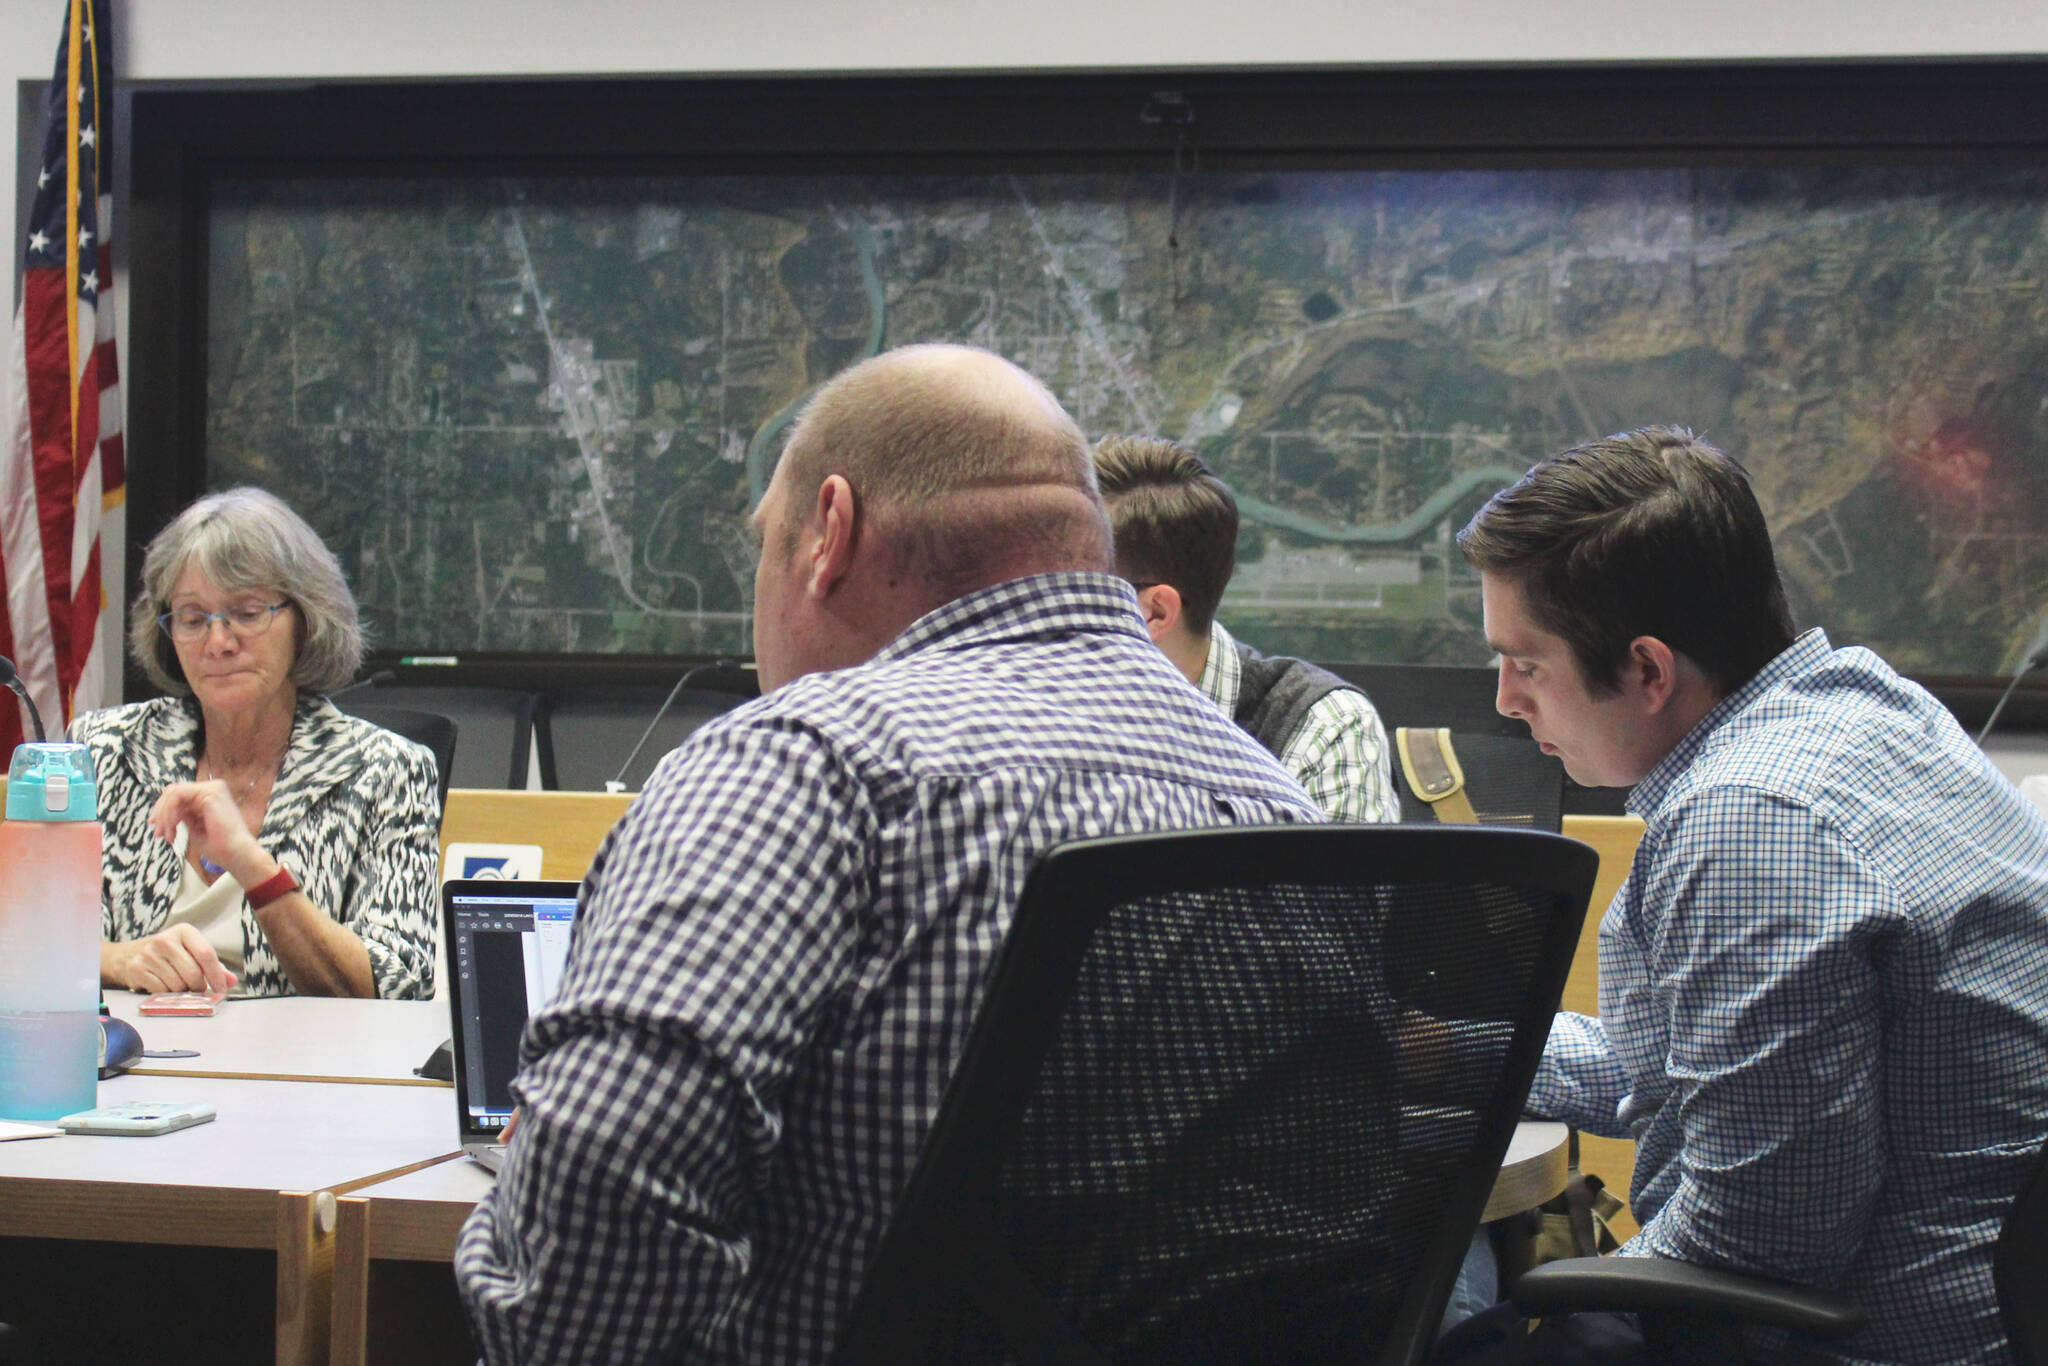 Soldotna City Council members convene for a work session to discuss how the city should use federal COVID-19 recovery funds on Wednesday, April 27, 2022 in Soldotna, Alaska. (Ashlyn O’Hara/Peninsula Clarion)